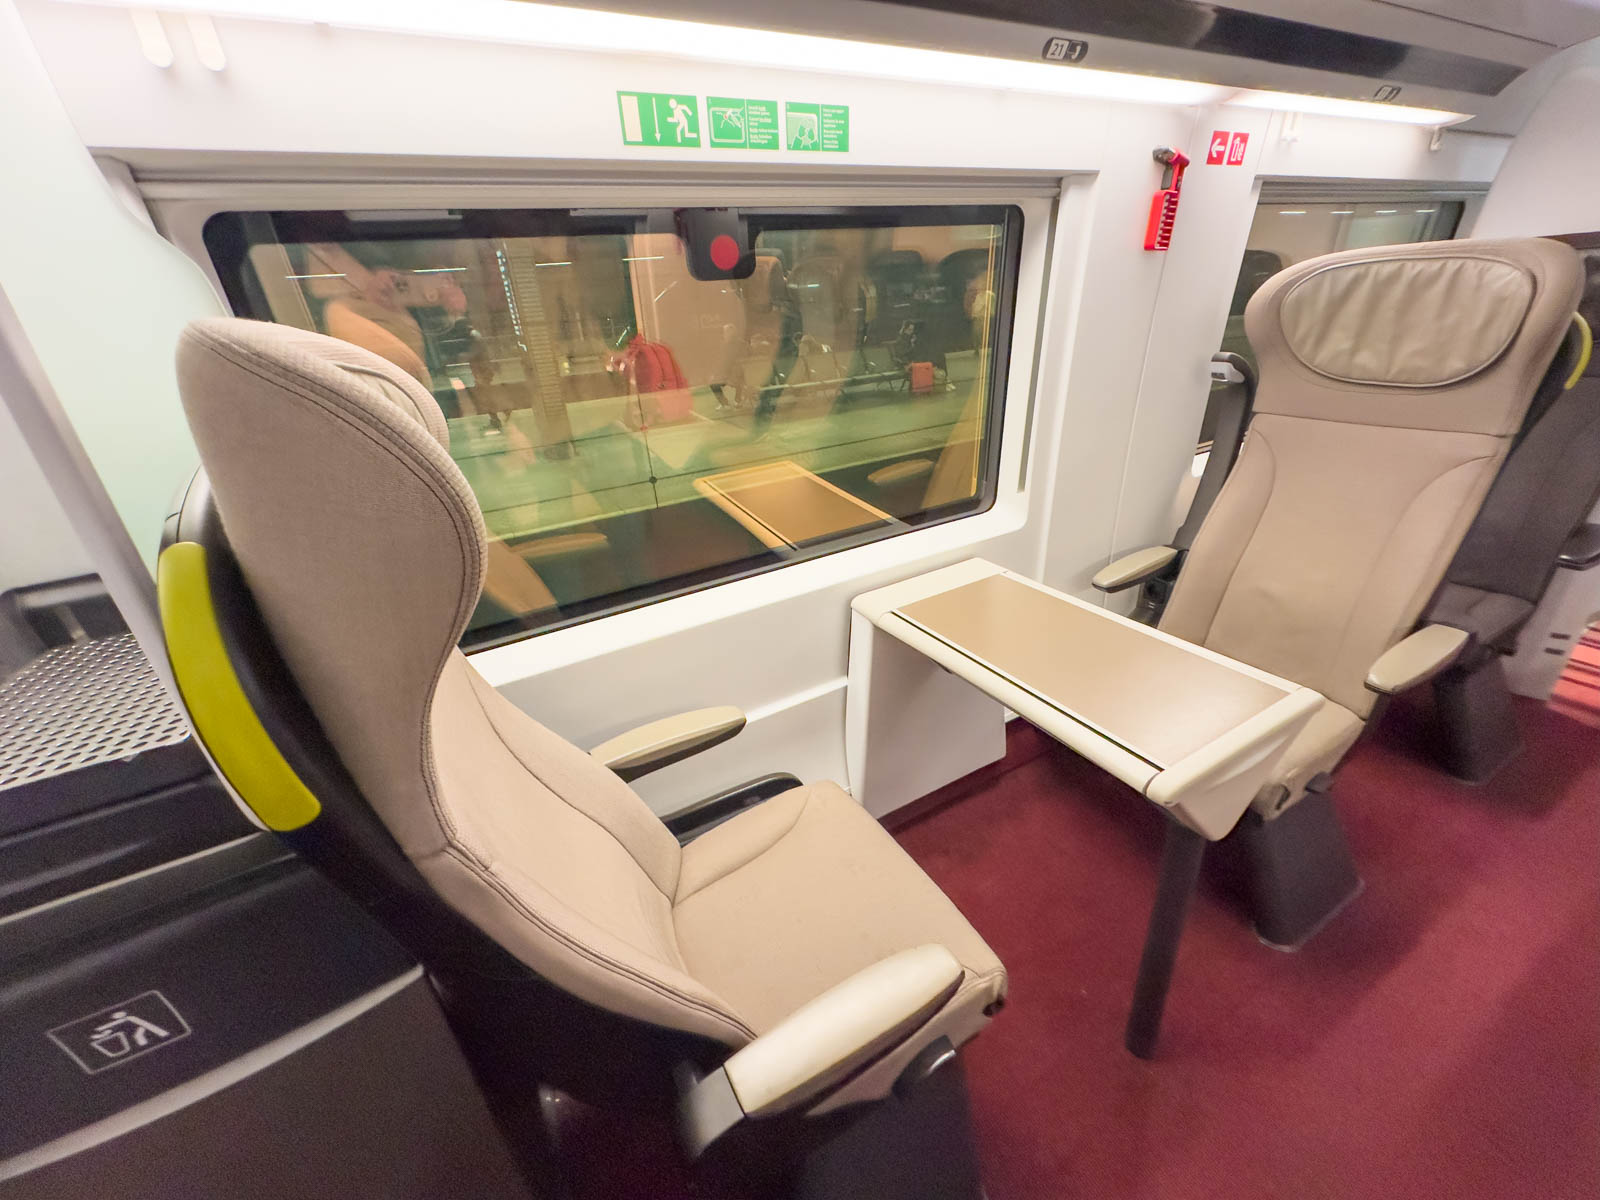 A set of 2 seats in the standard premier section of the train.